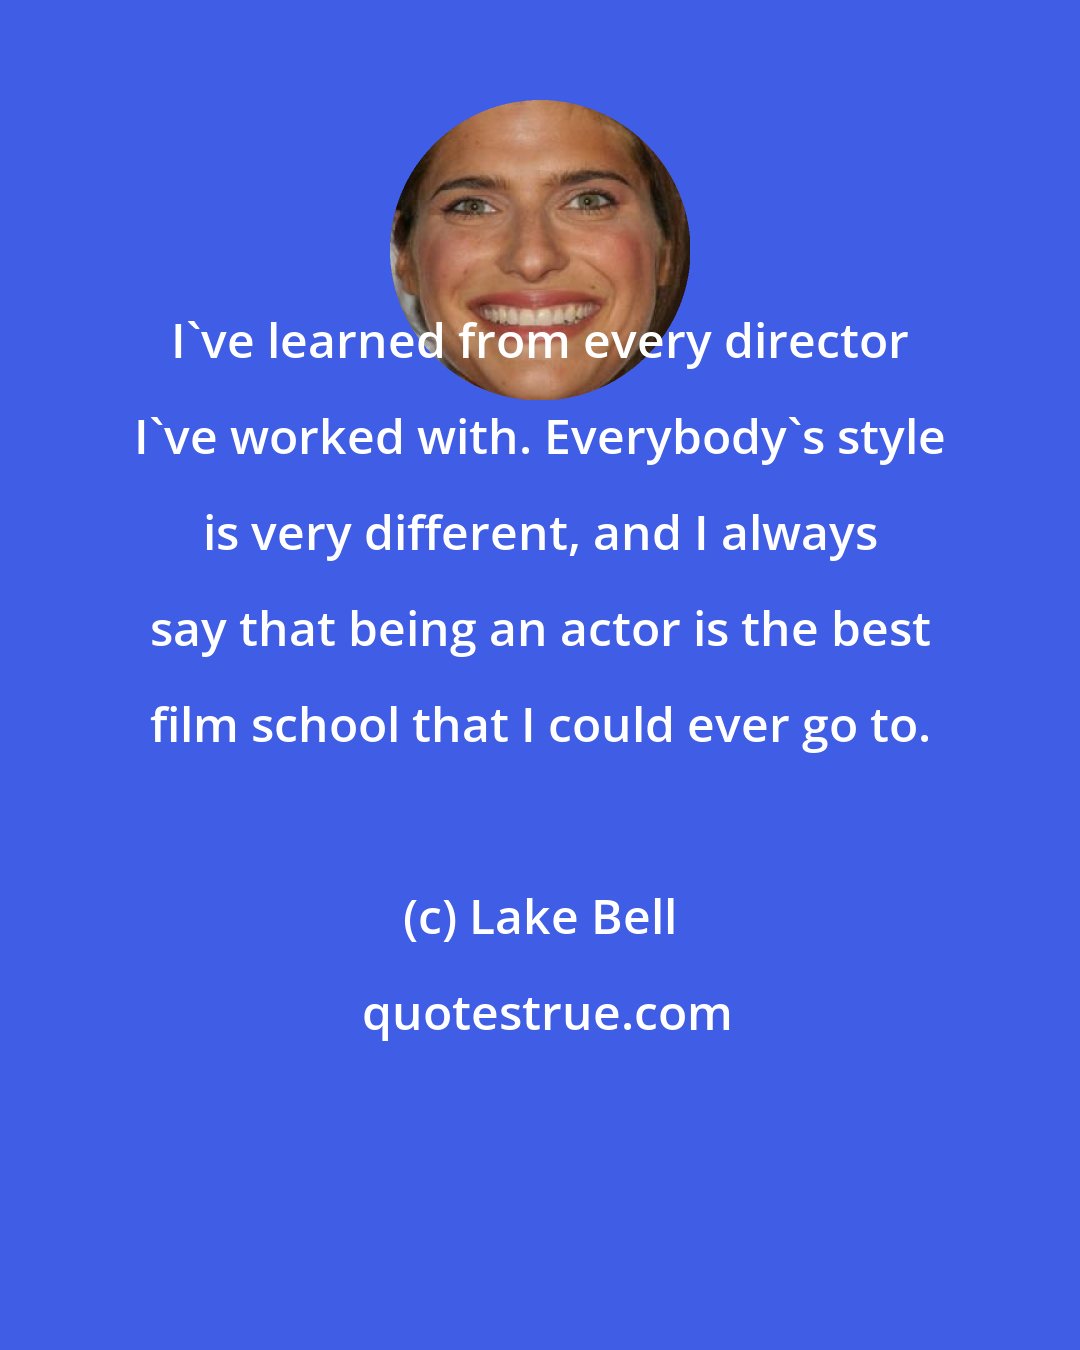 Lake Bell: I've learned from every director I've worked with. Everybody's style is very different, and I always say that being an actor is the best film school that I could ever go to.